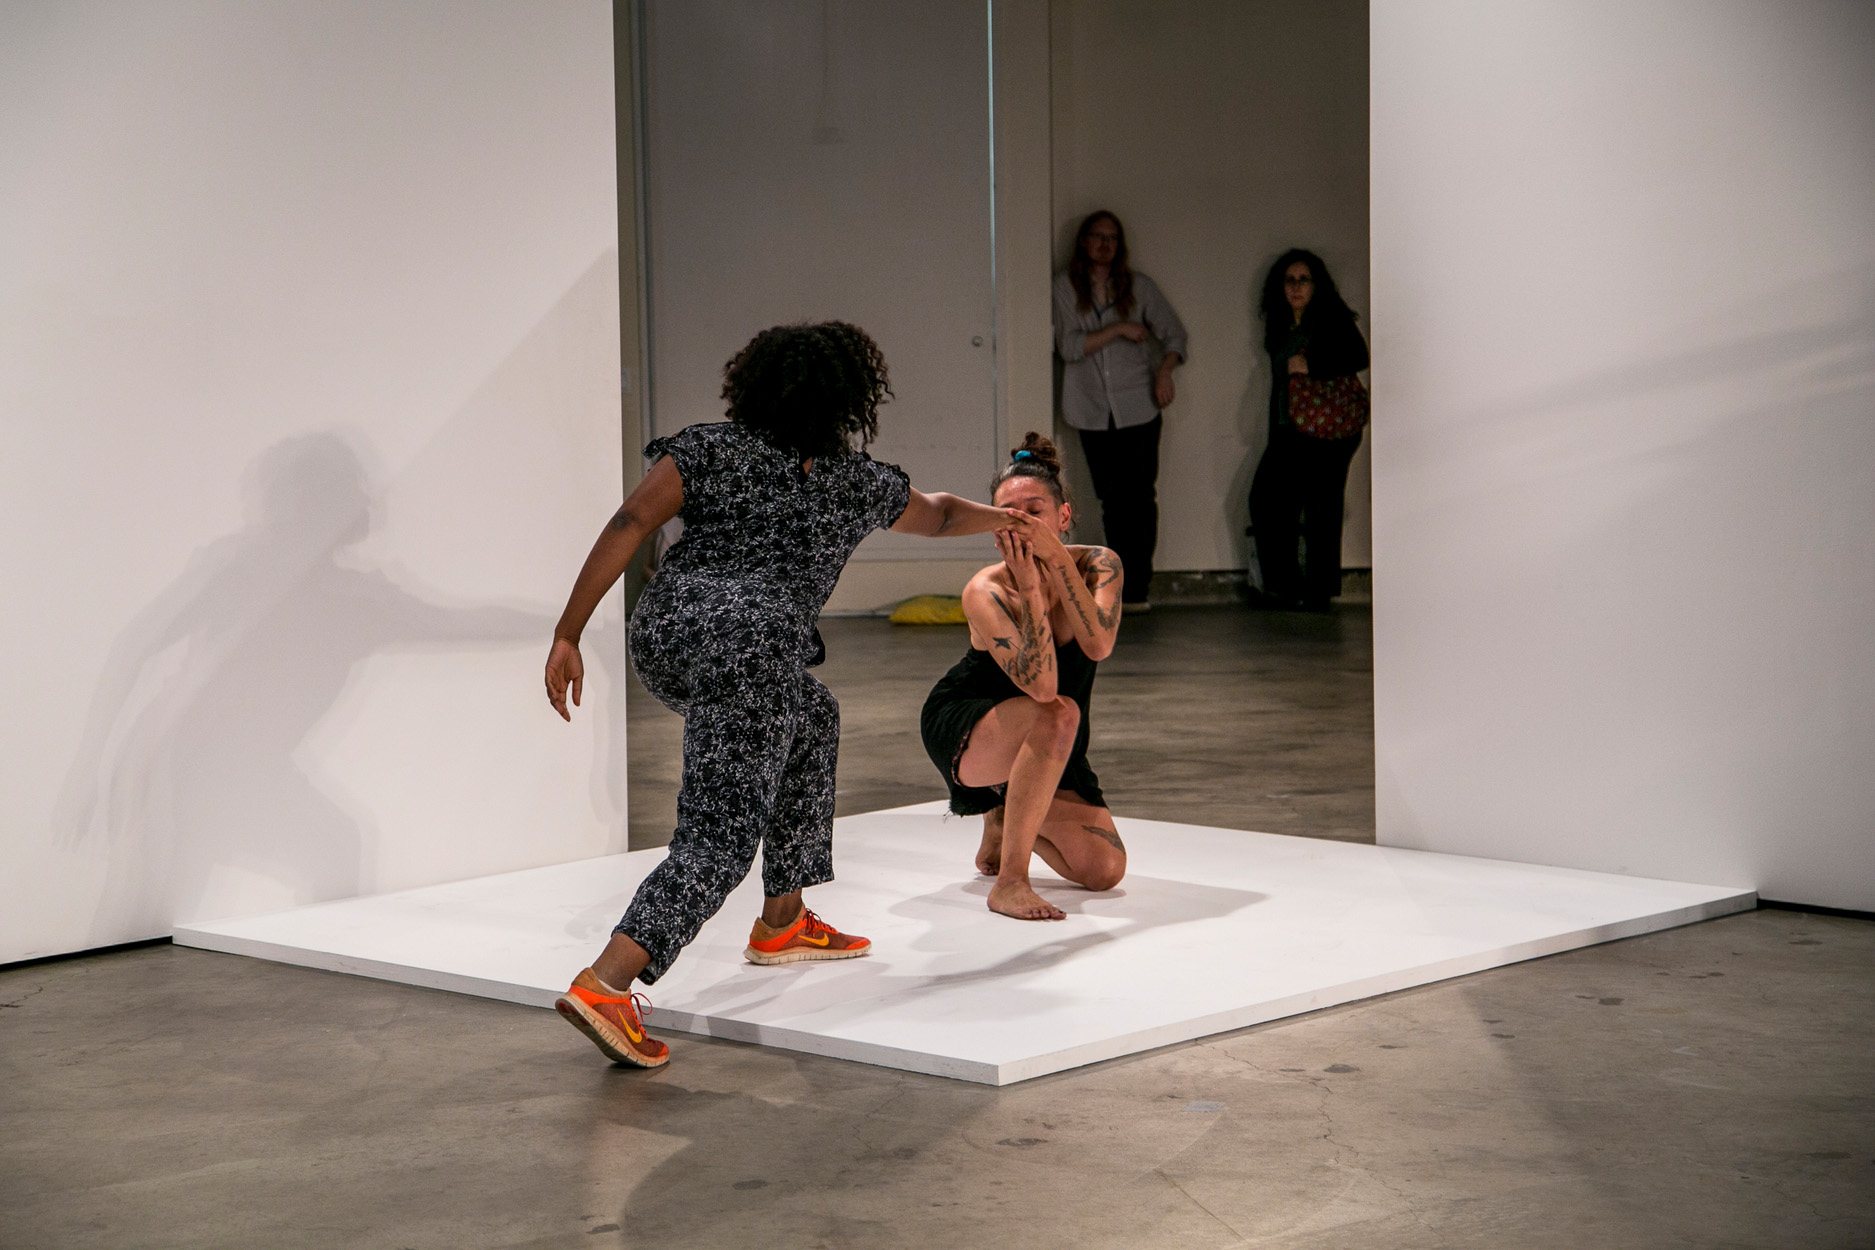 Gerard & Kelly. <em>Reusable Parts/Endless Love</em>, 2011/2014. <em>Made in L.A. 2014</em>. Performance at the Hammer Museum, Los Angeles. June 20, 2014. Photography by Barbara Katz.